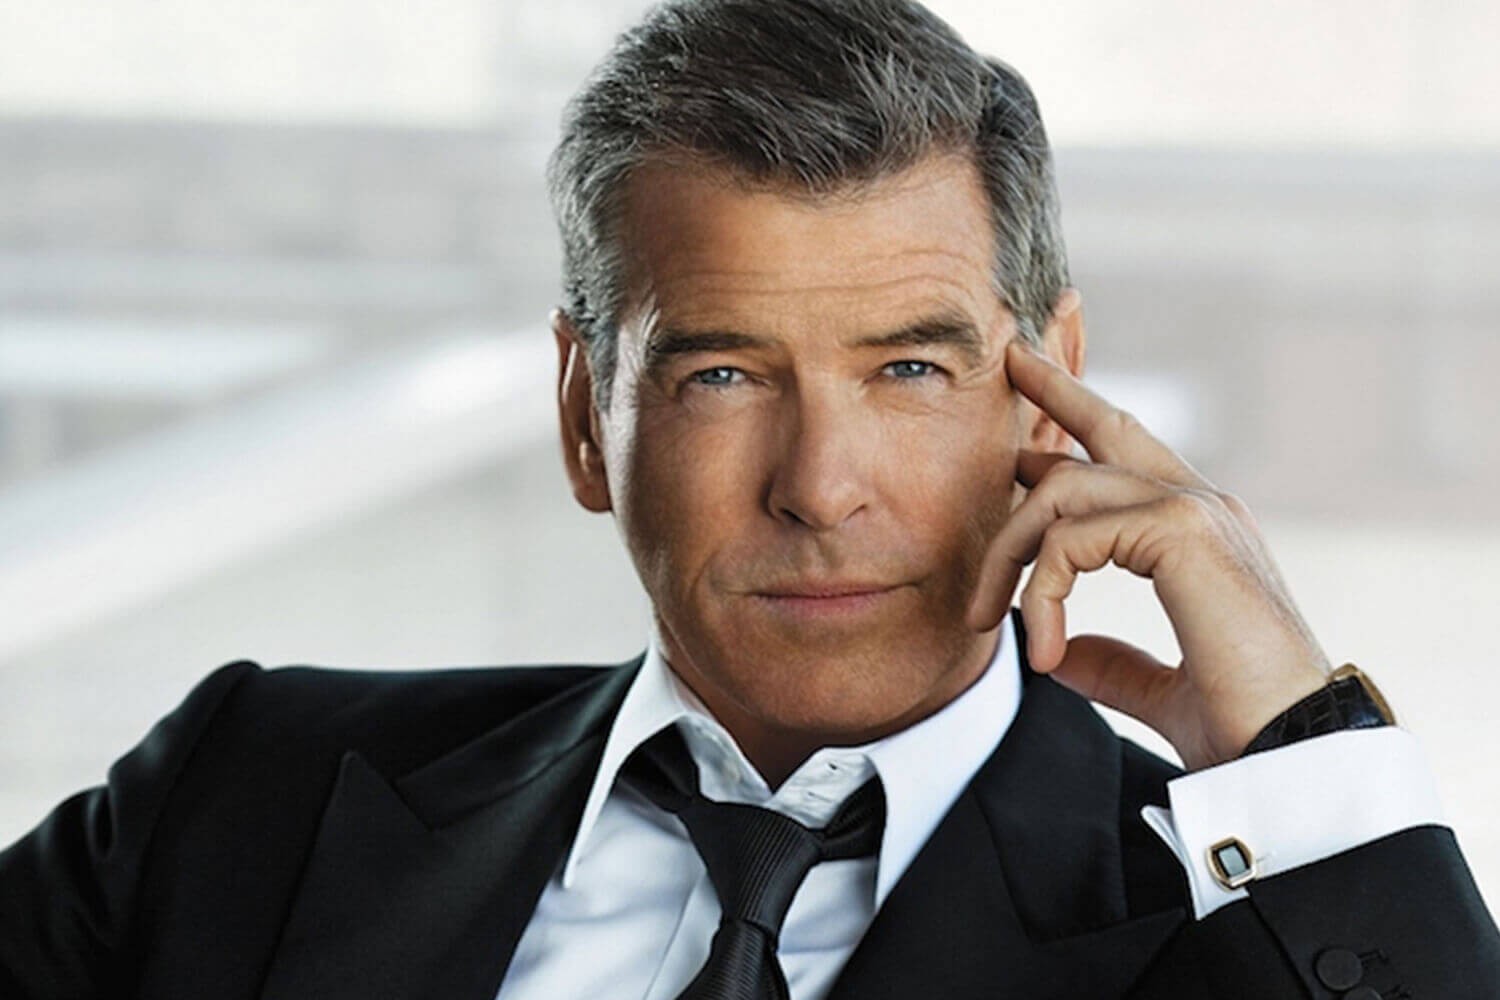 The story was kind of weak: Pierce Brosnan Had Major Problems With Daniel  Craig's Hit James Bond Movie After He Retired From the Spy Franchise -  FandomWire